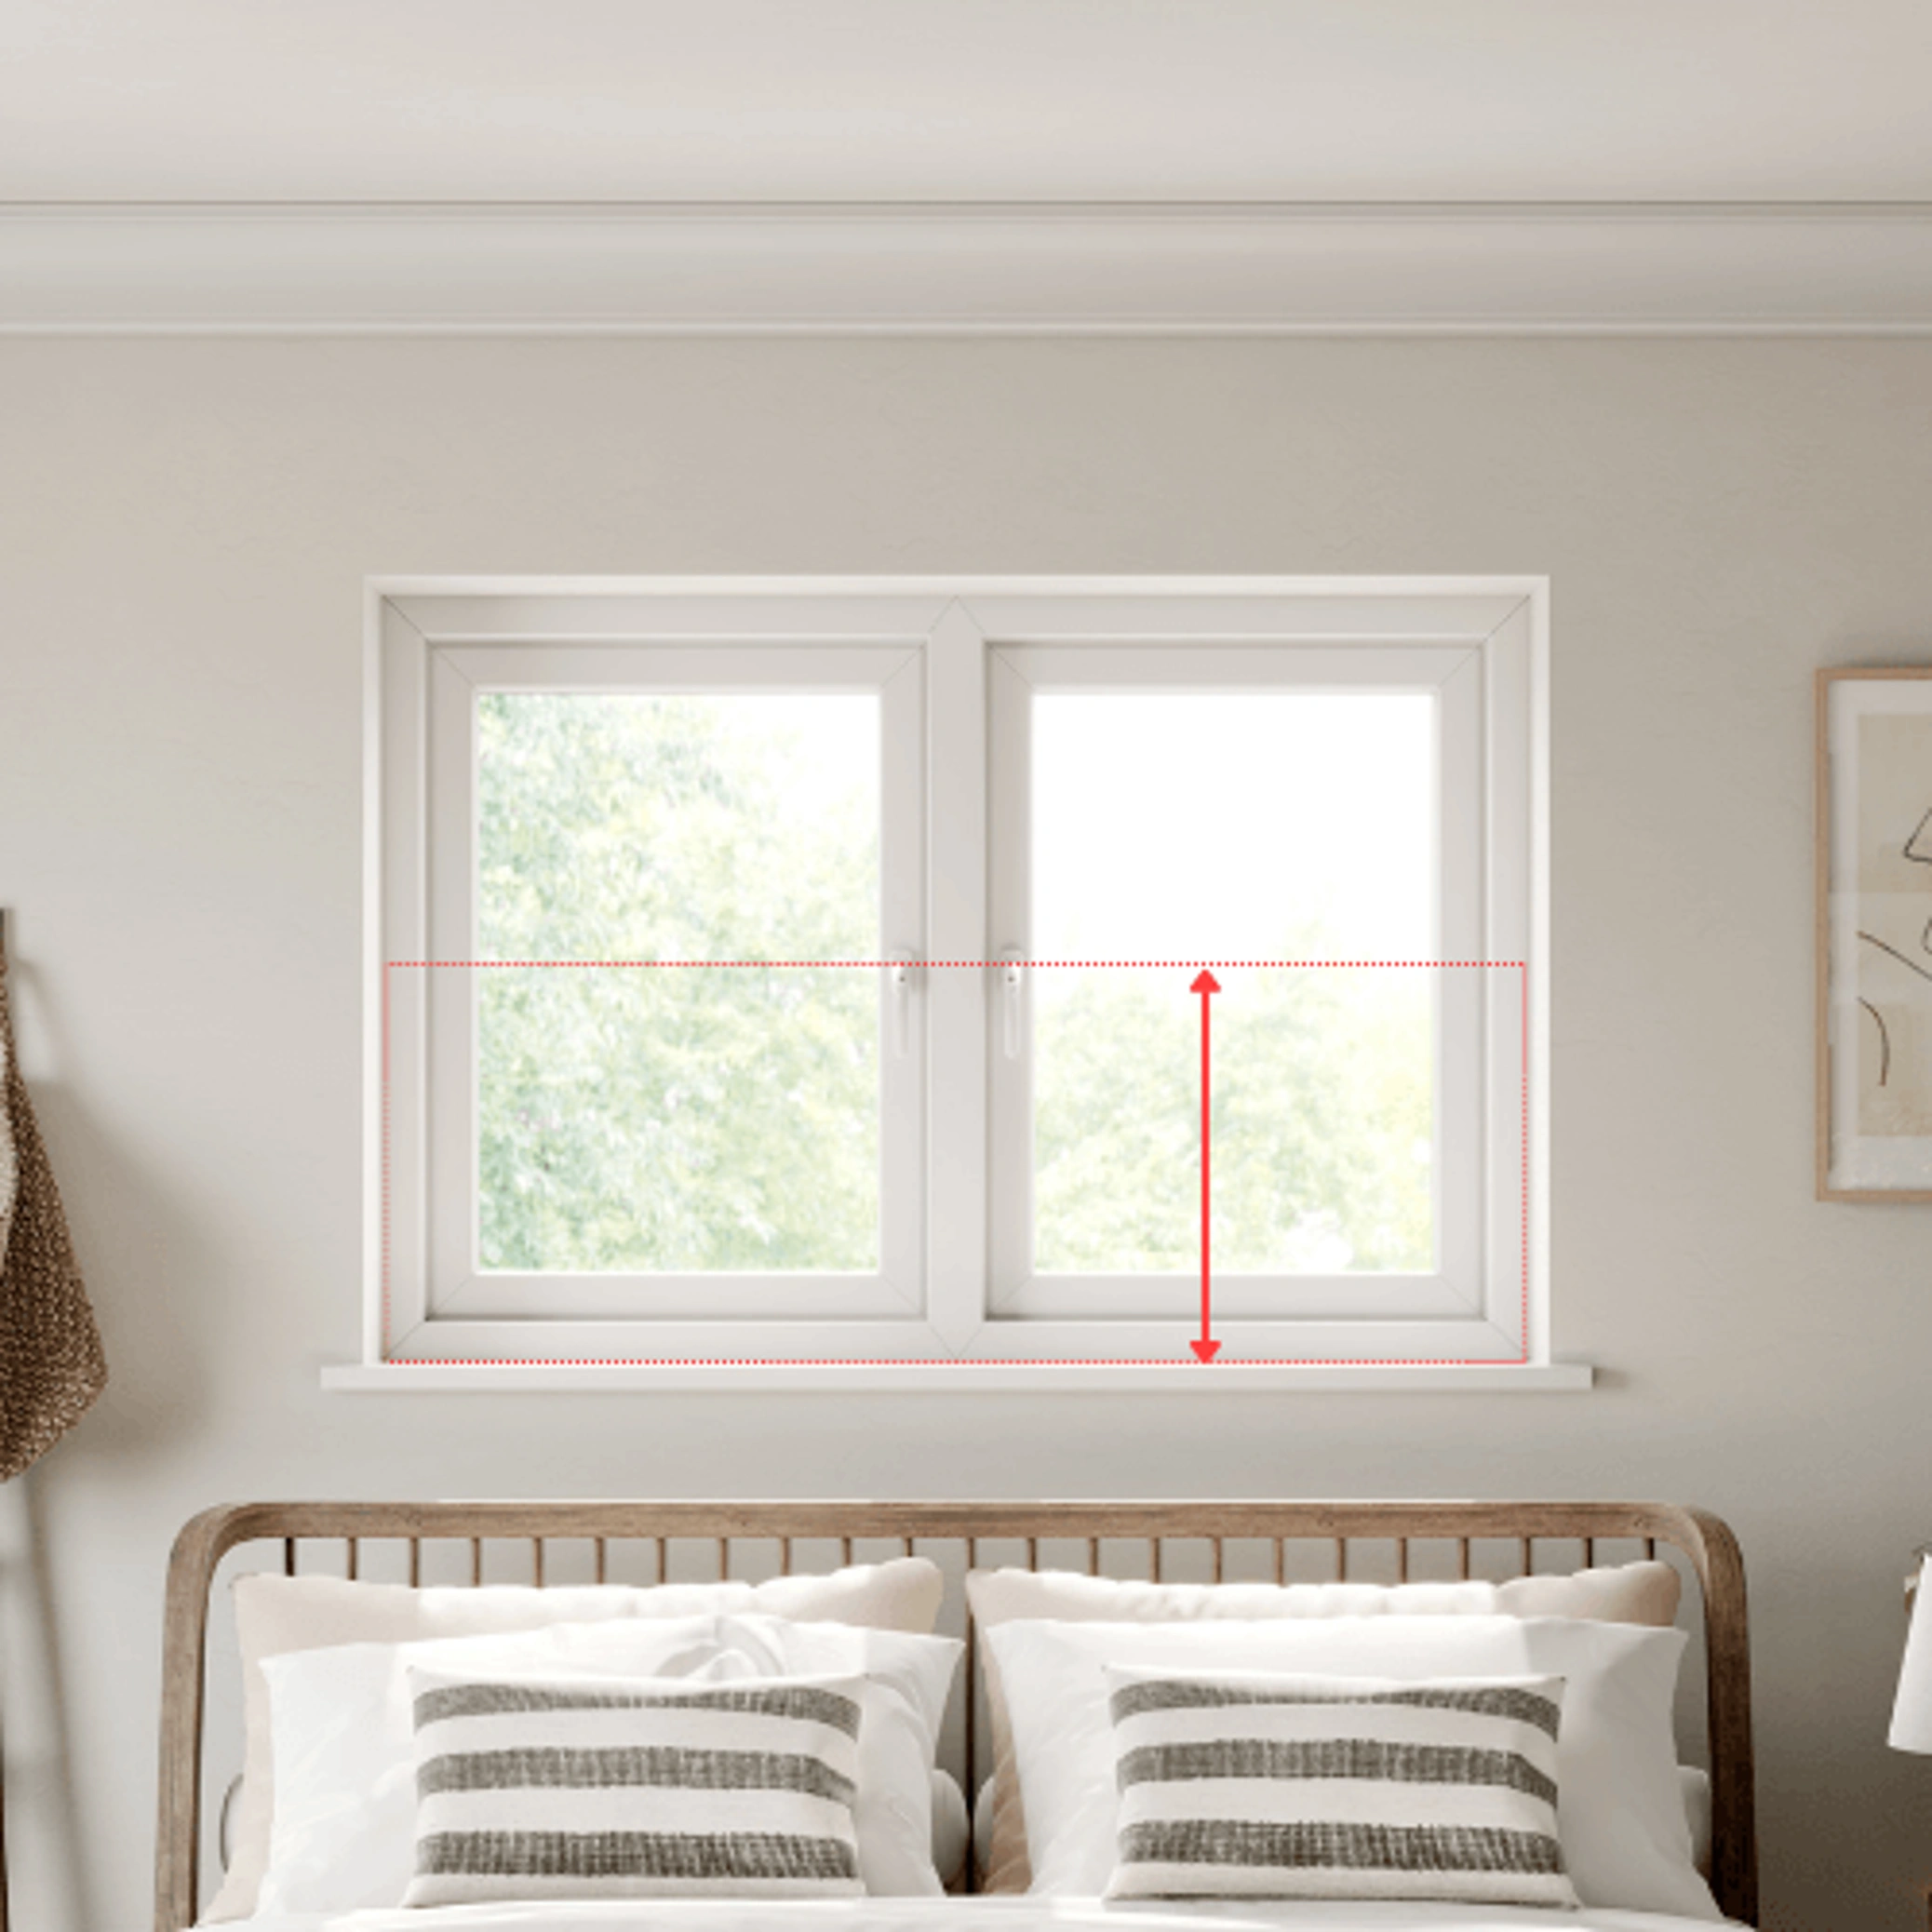 Measuring a recessed window for cafe style shutters